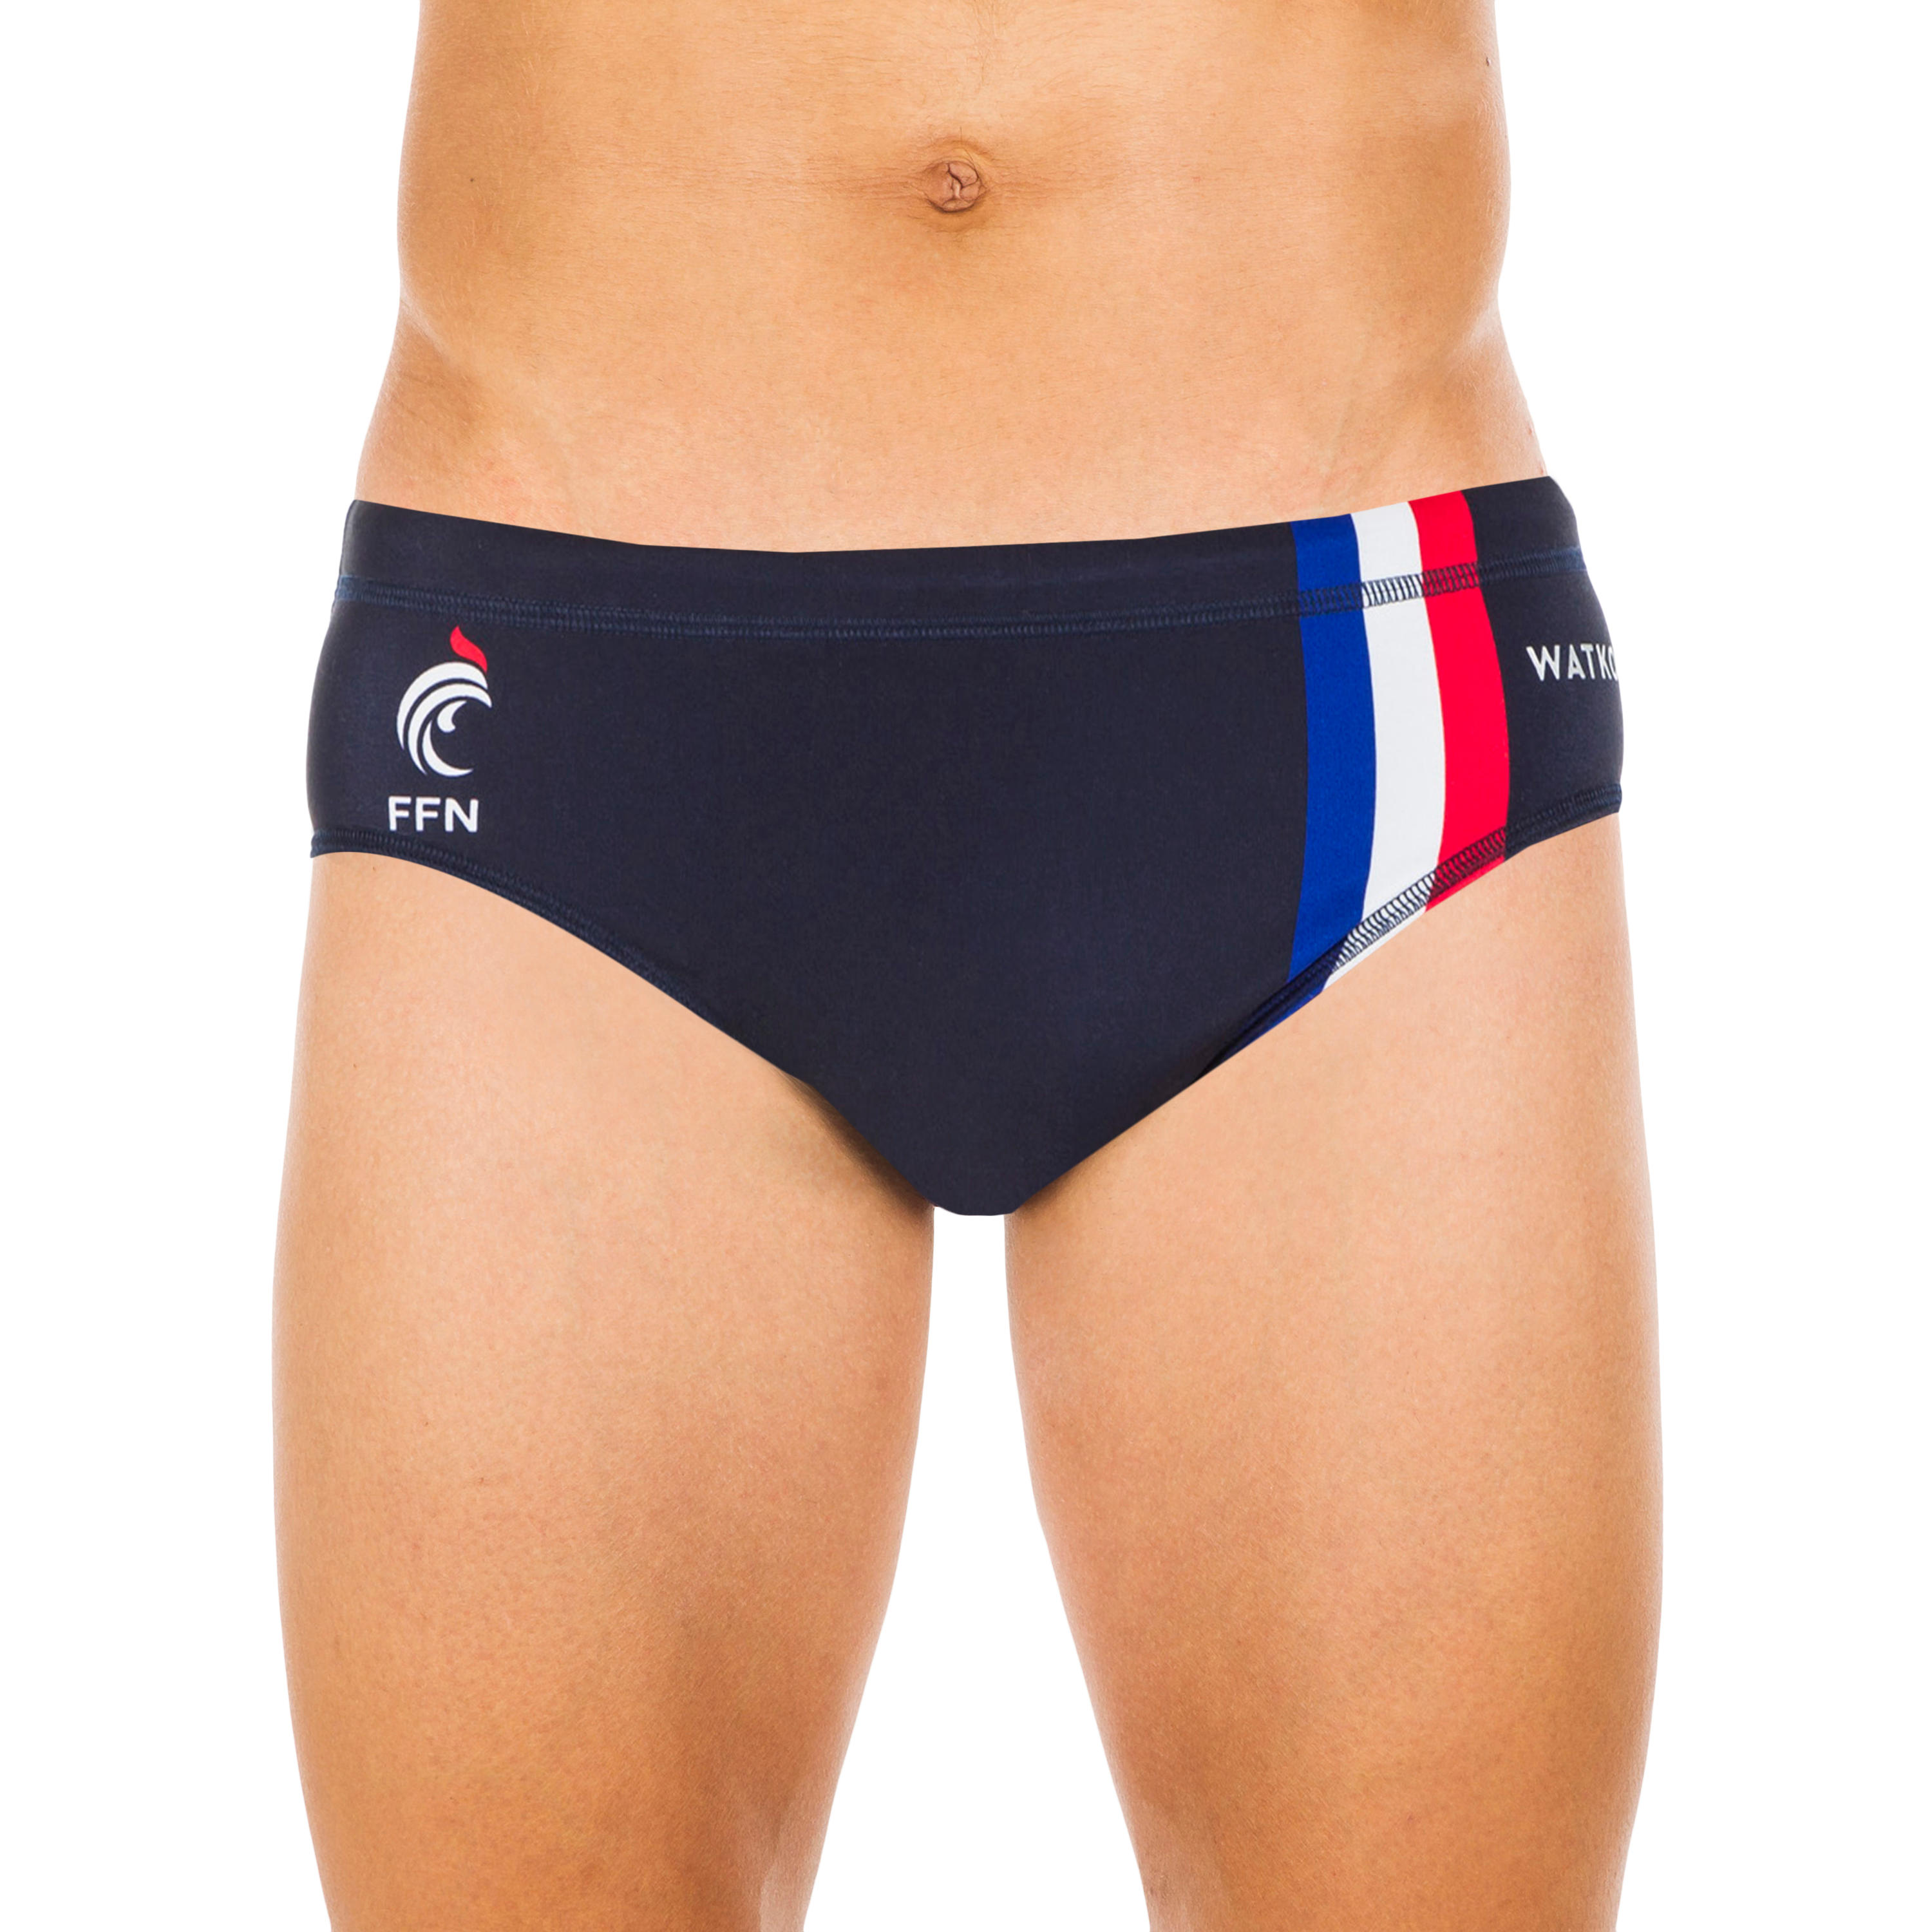 WATKO MEN'S WATER POLO SWIMMING BRIEFS - OFFICIAL FRANCE